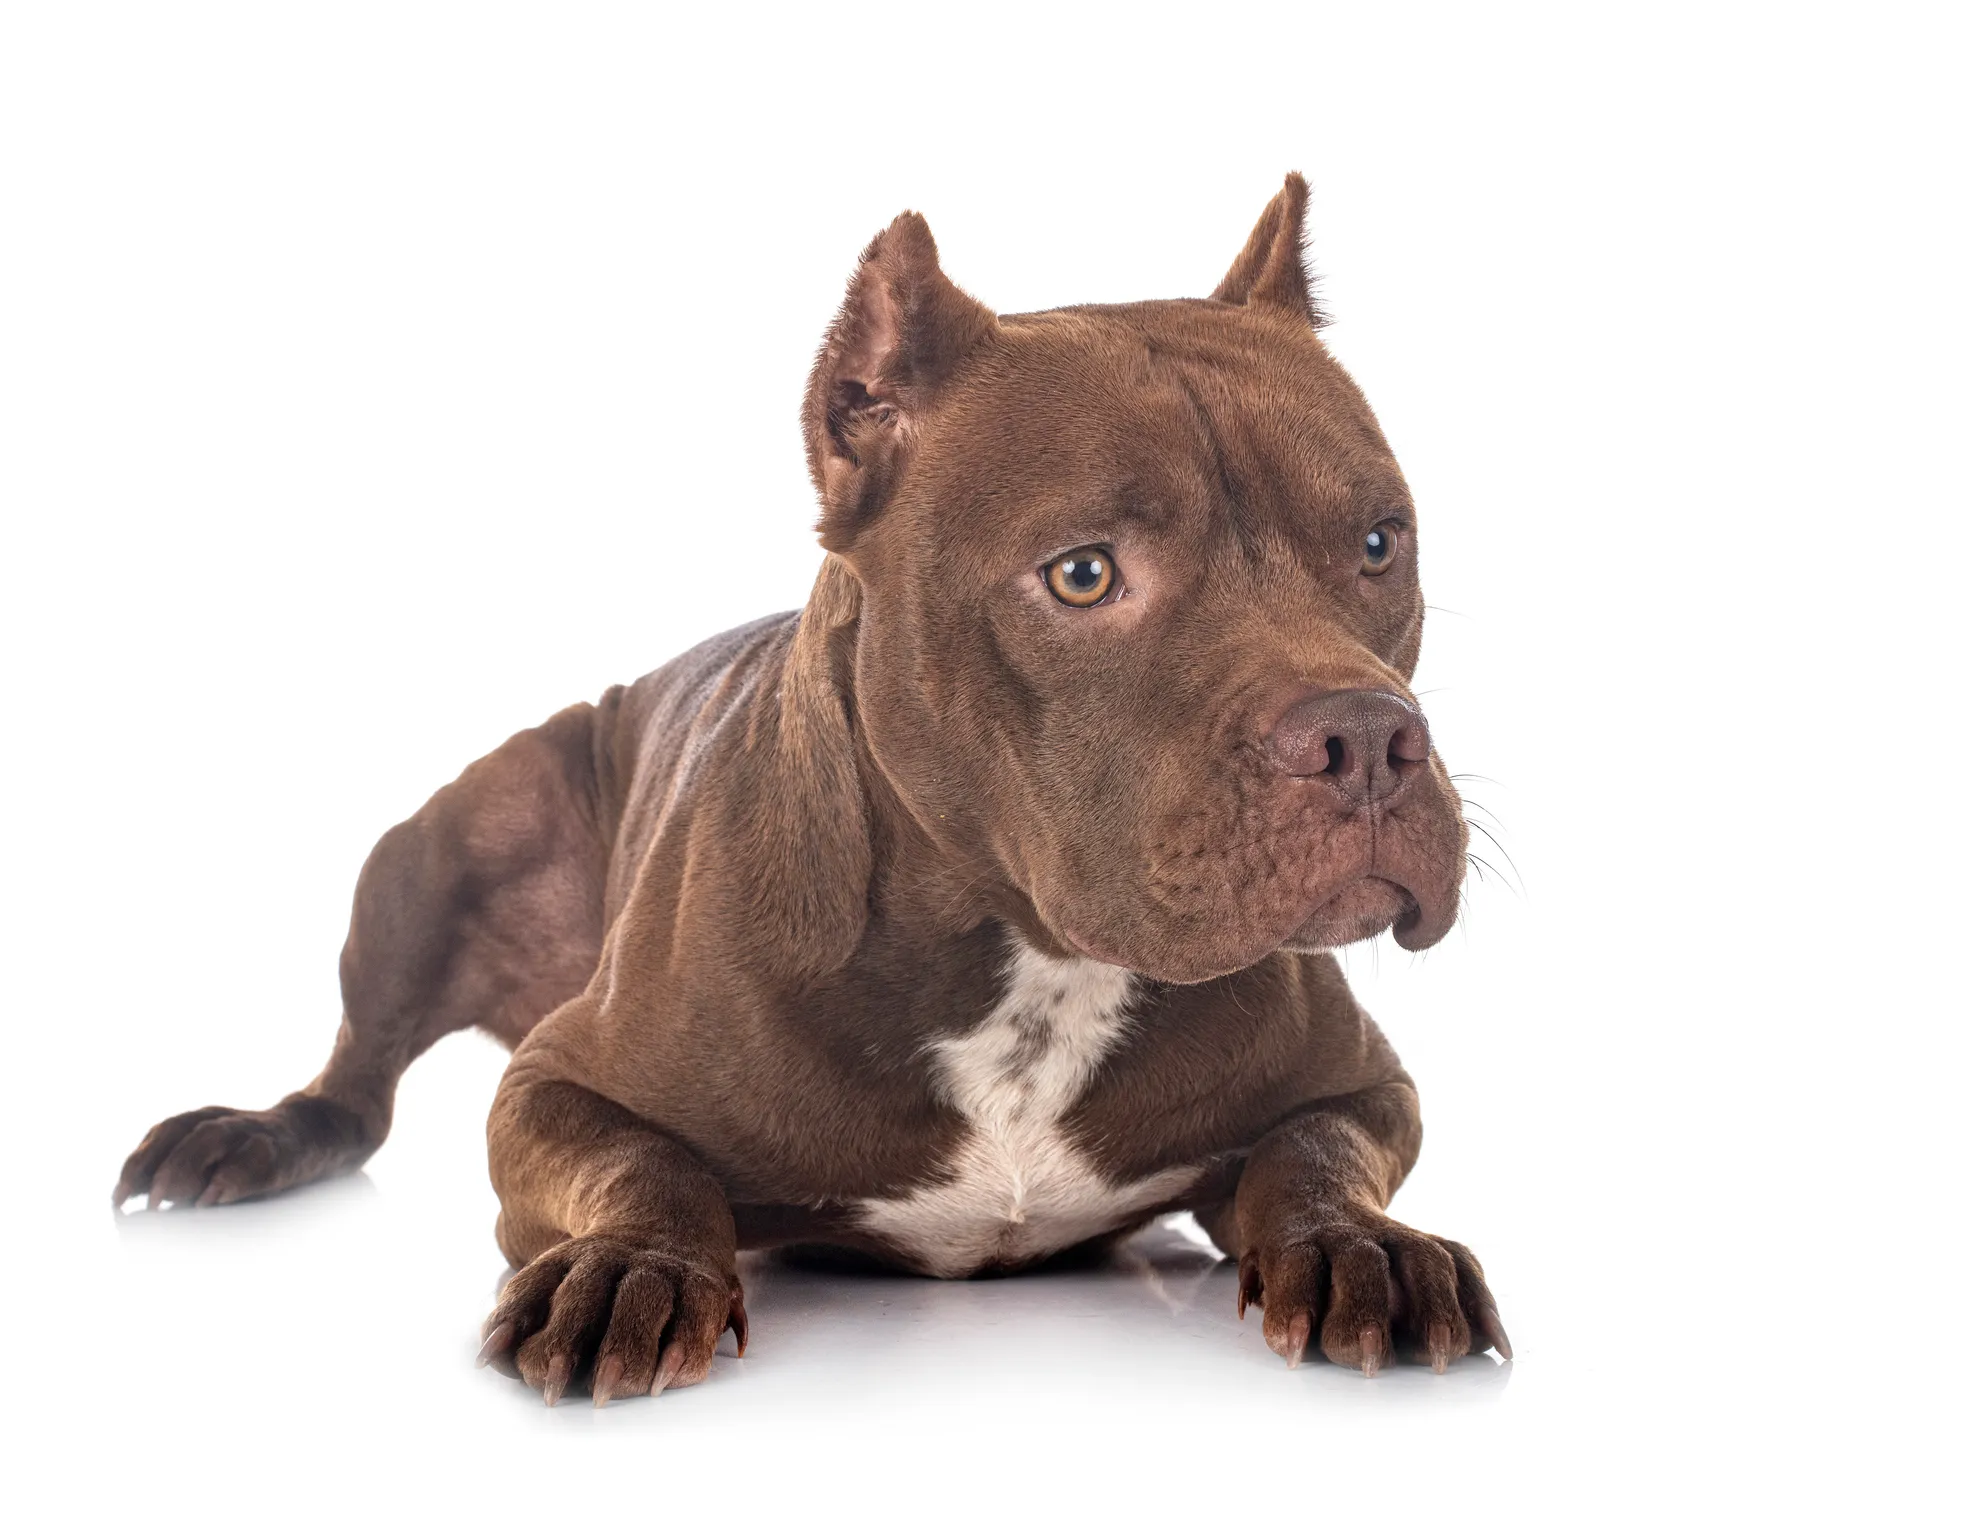 American Pit Bull Terrier Dog Breed Information and Characteristics